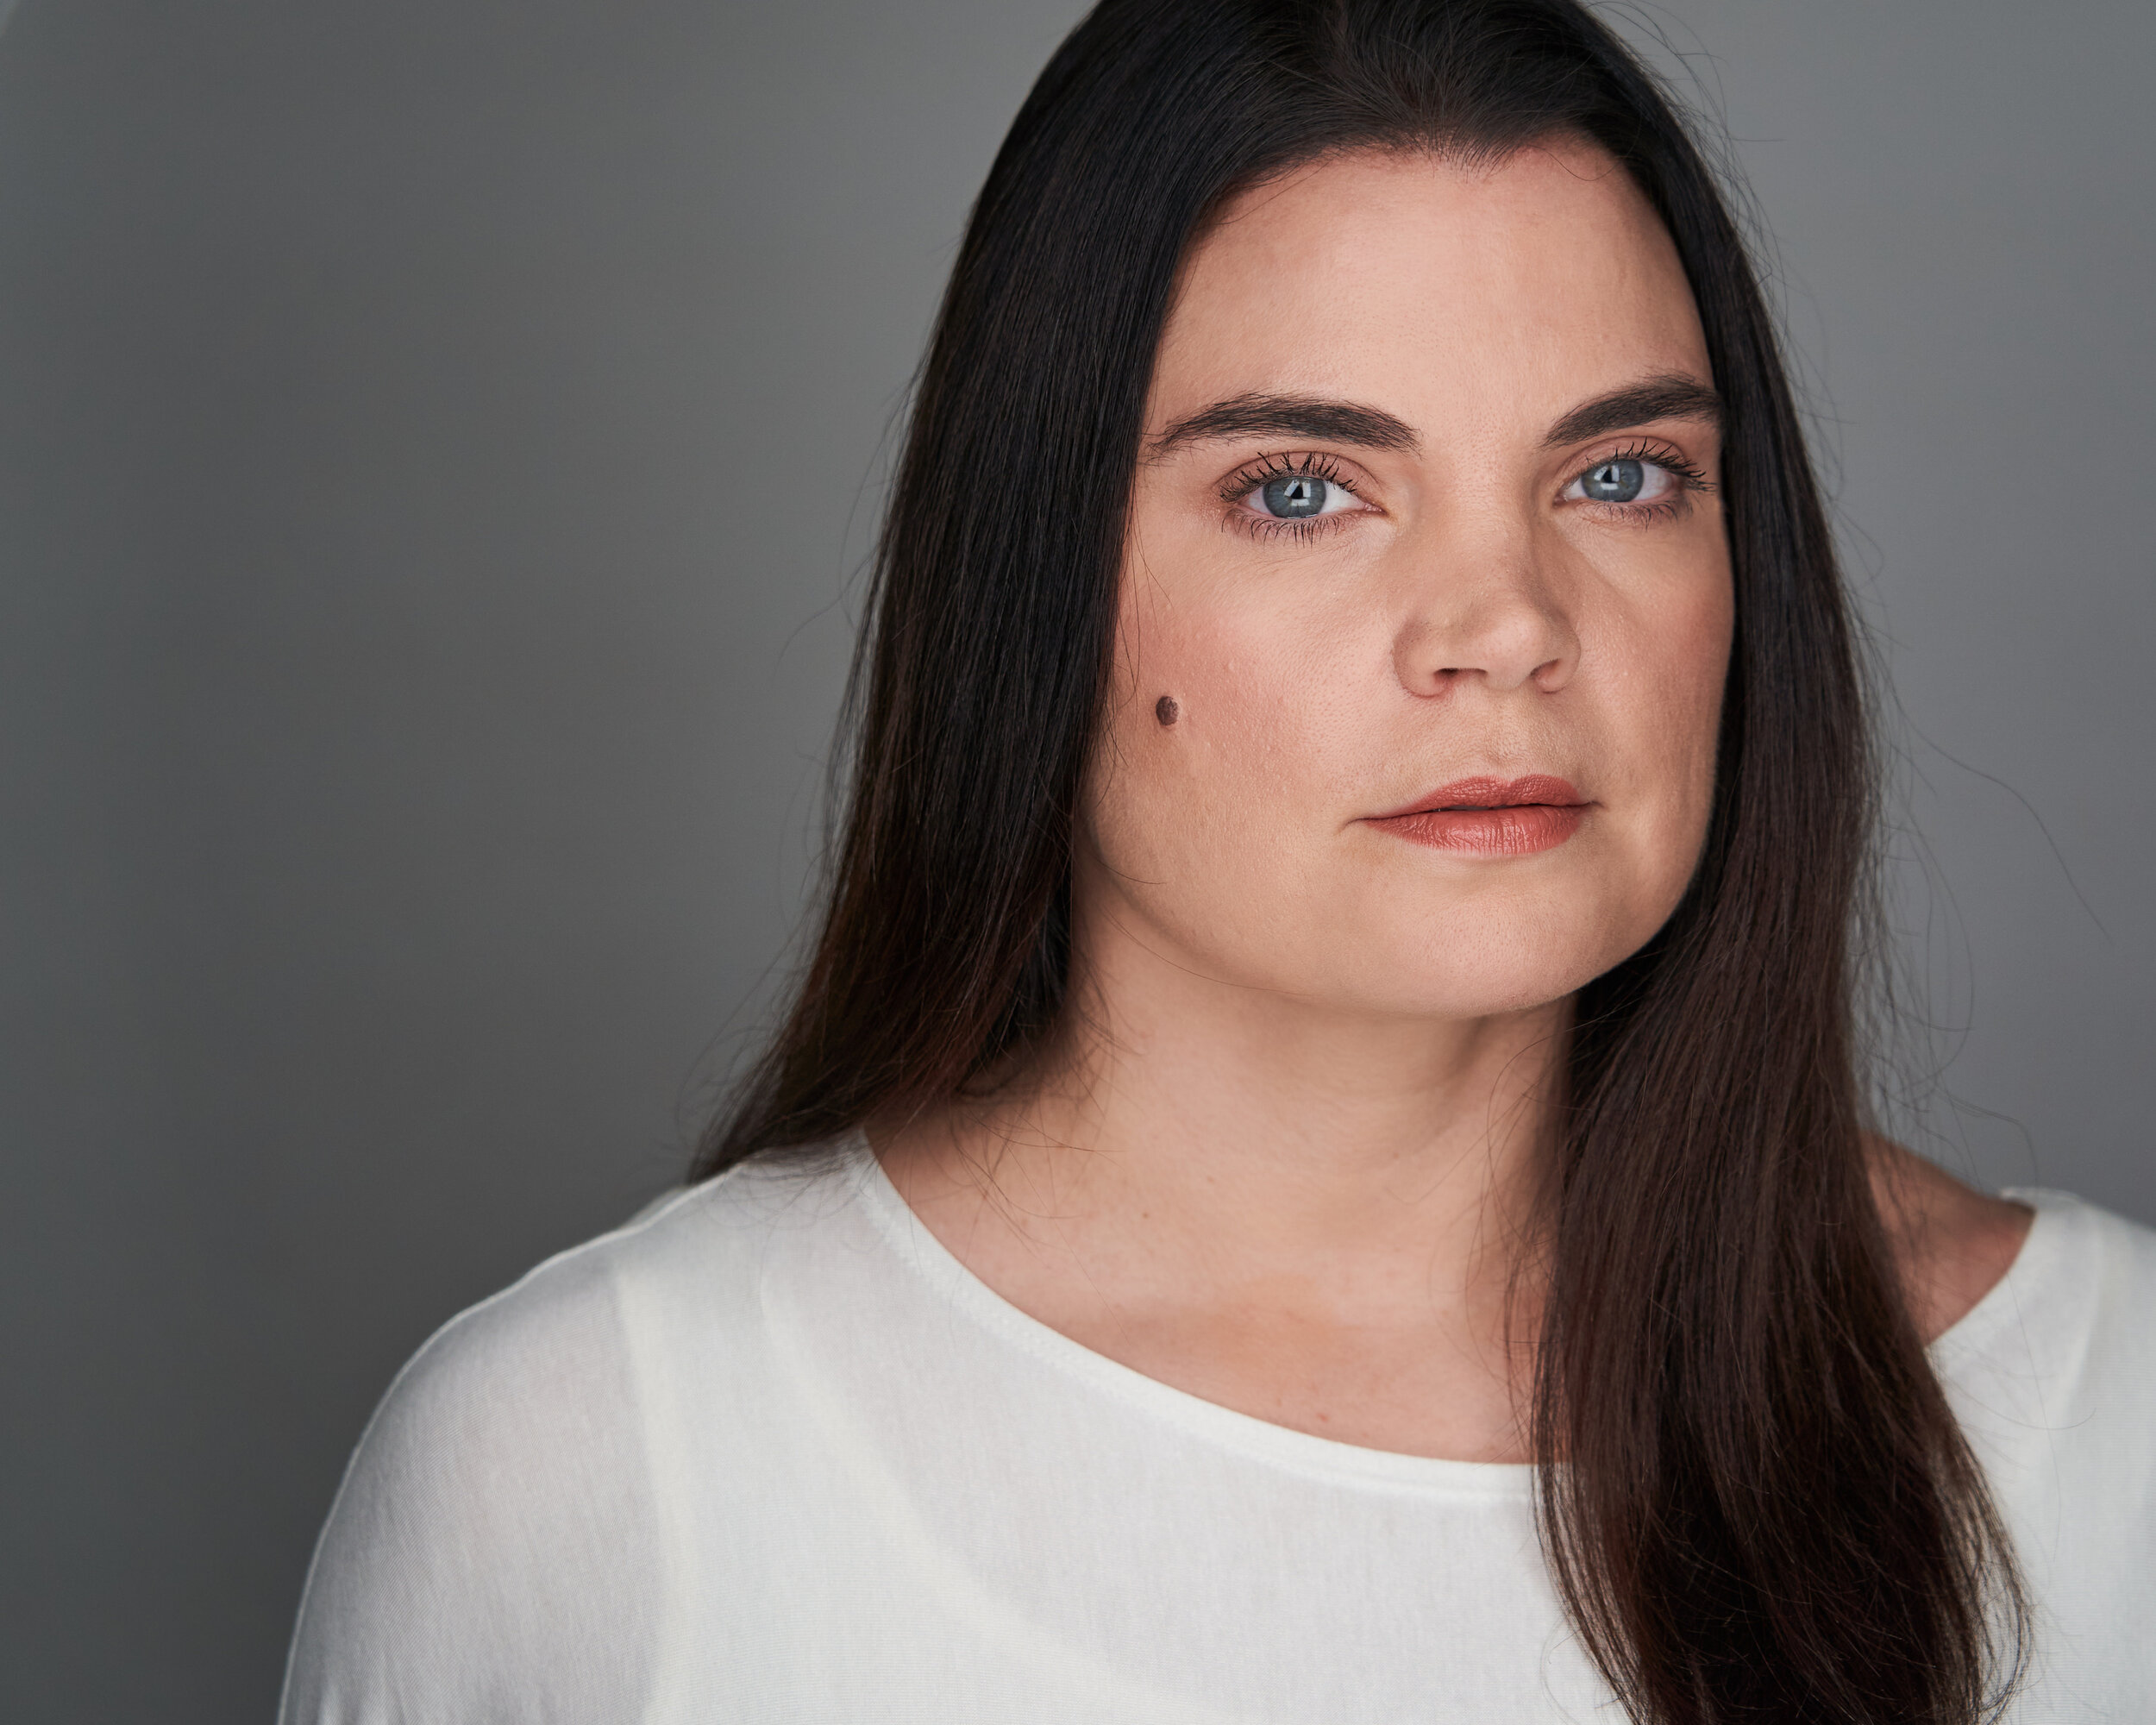  Actor Stacy Beckly poses for a headshot at SOSKIphoto in Hayward, California, on August 8, 2020. (Stan Olszewski/SOSKIphoto) 